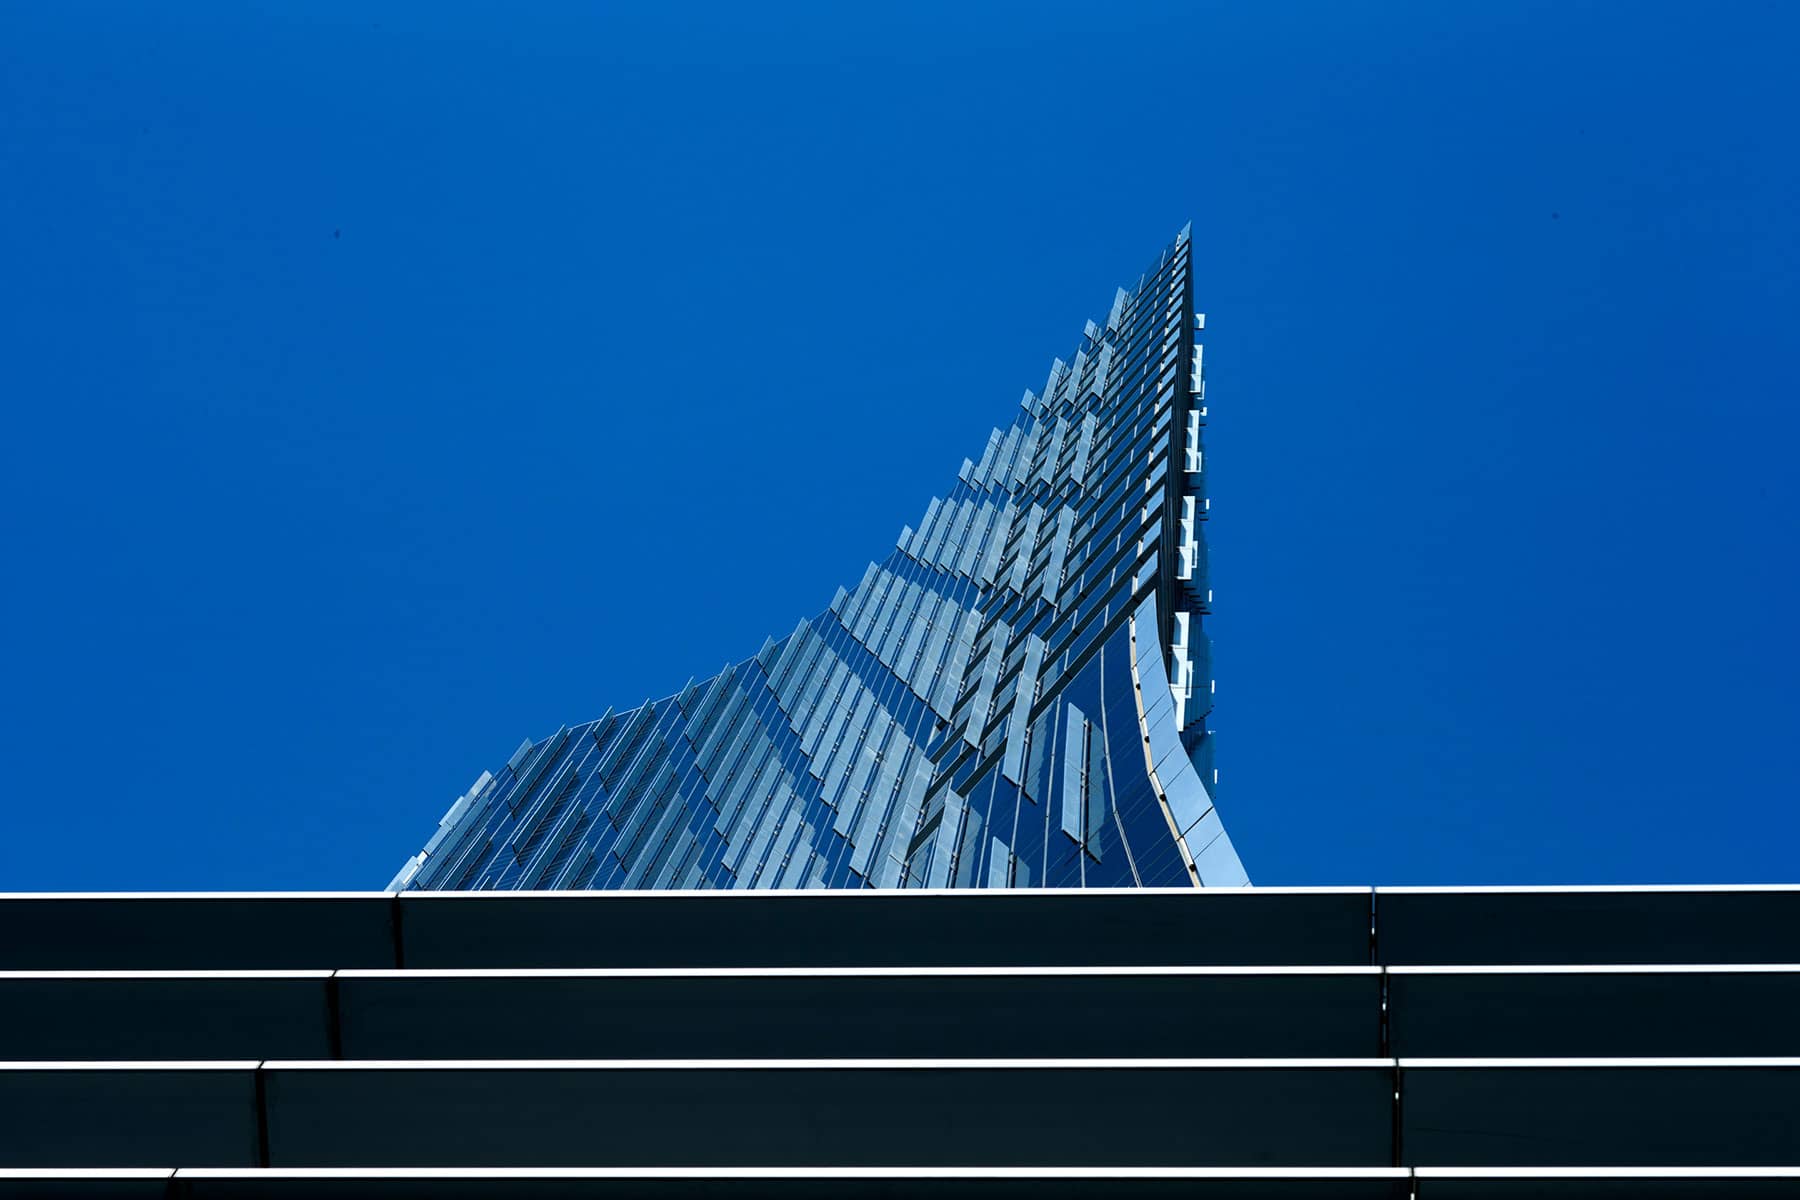 Architecture Photography Abu Dhabi: Abstract Perspective of façade at Rosewood Hotel, Abu Dhabi.